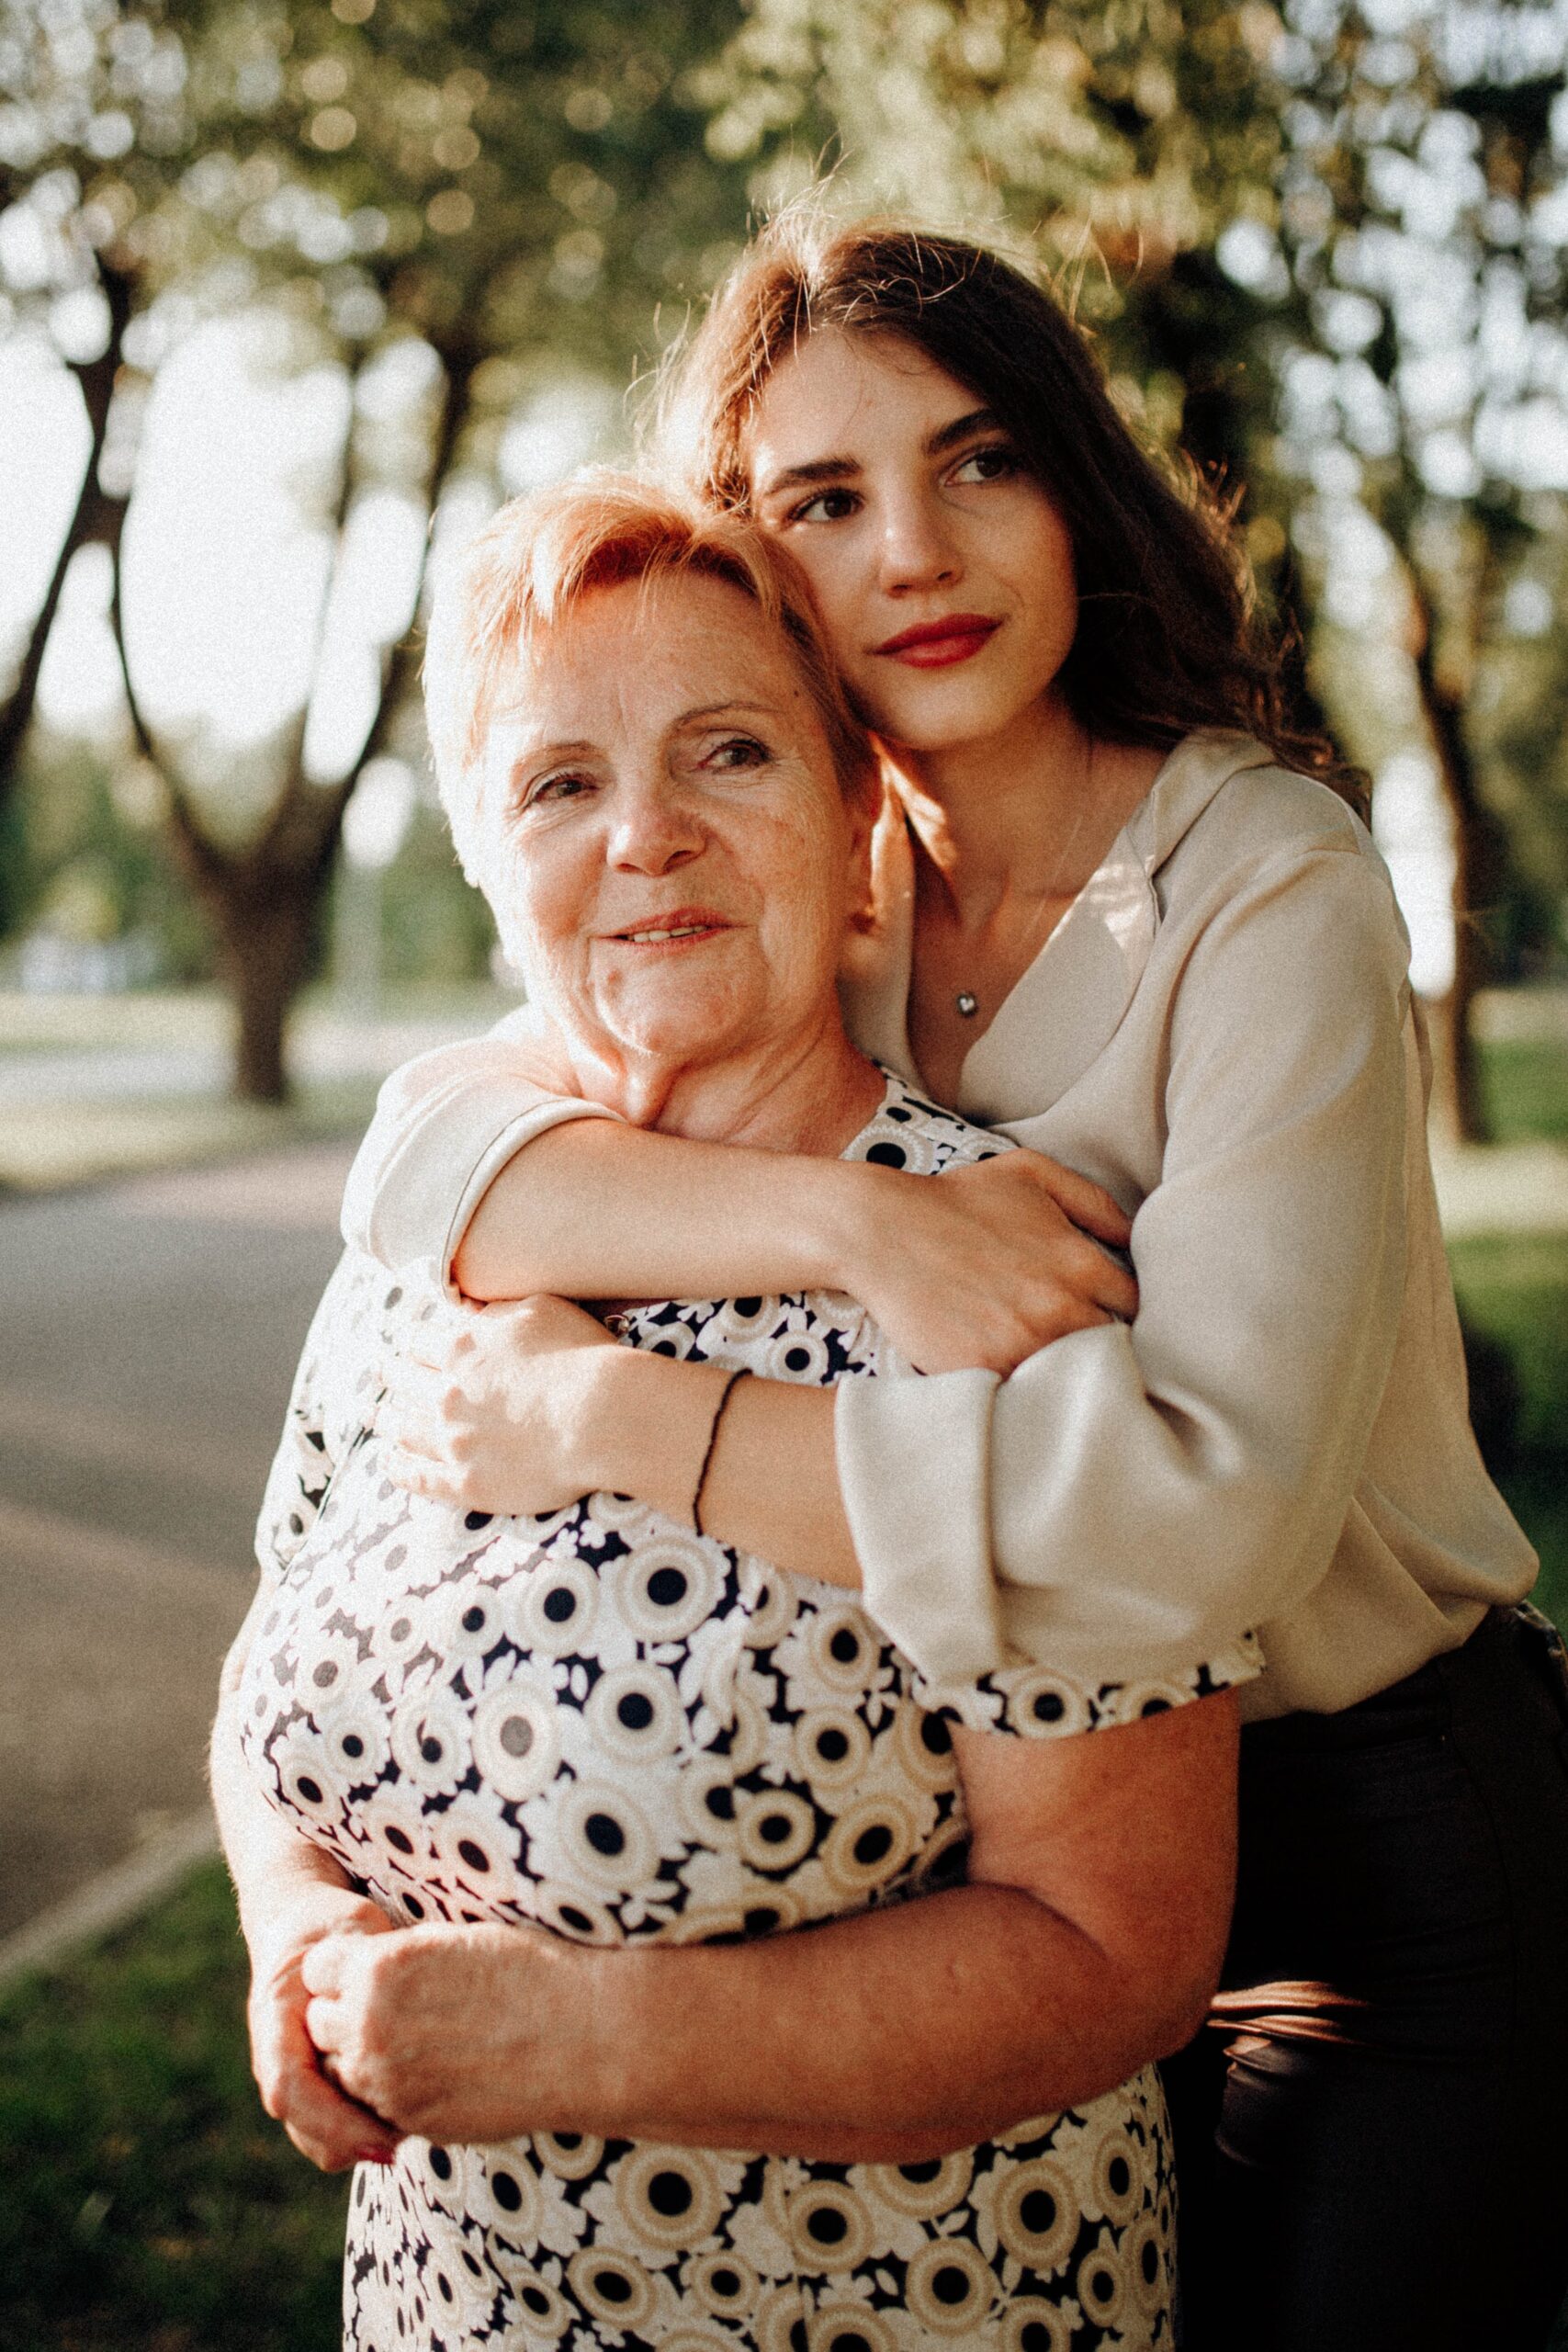 A younger woman embracing an older one from behind | Source: Pexels